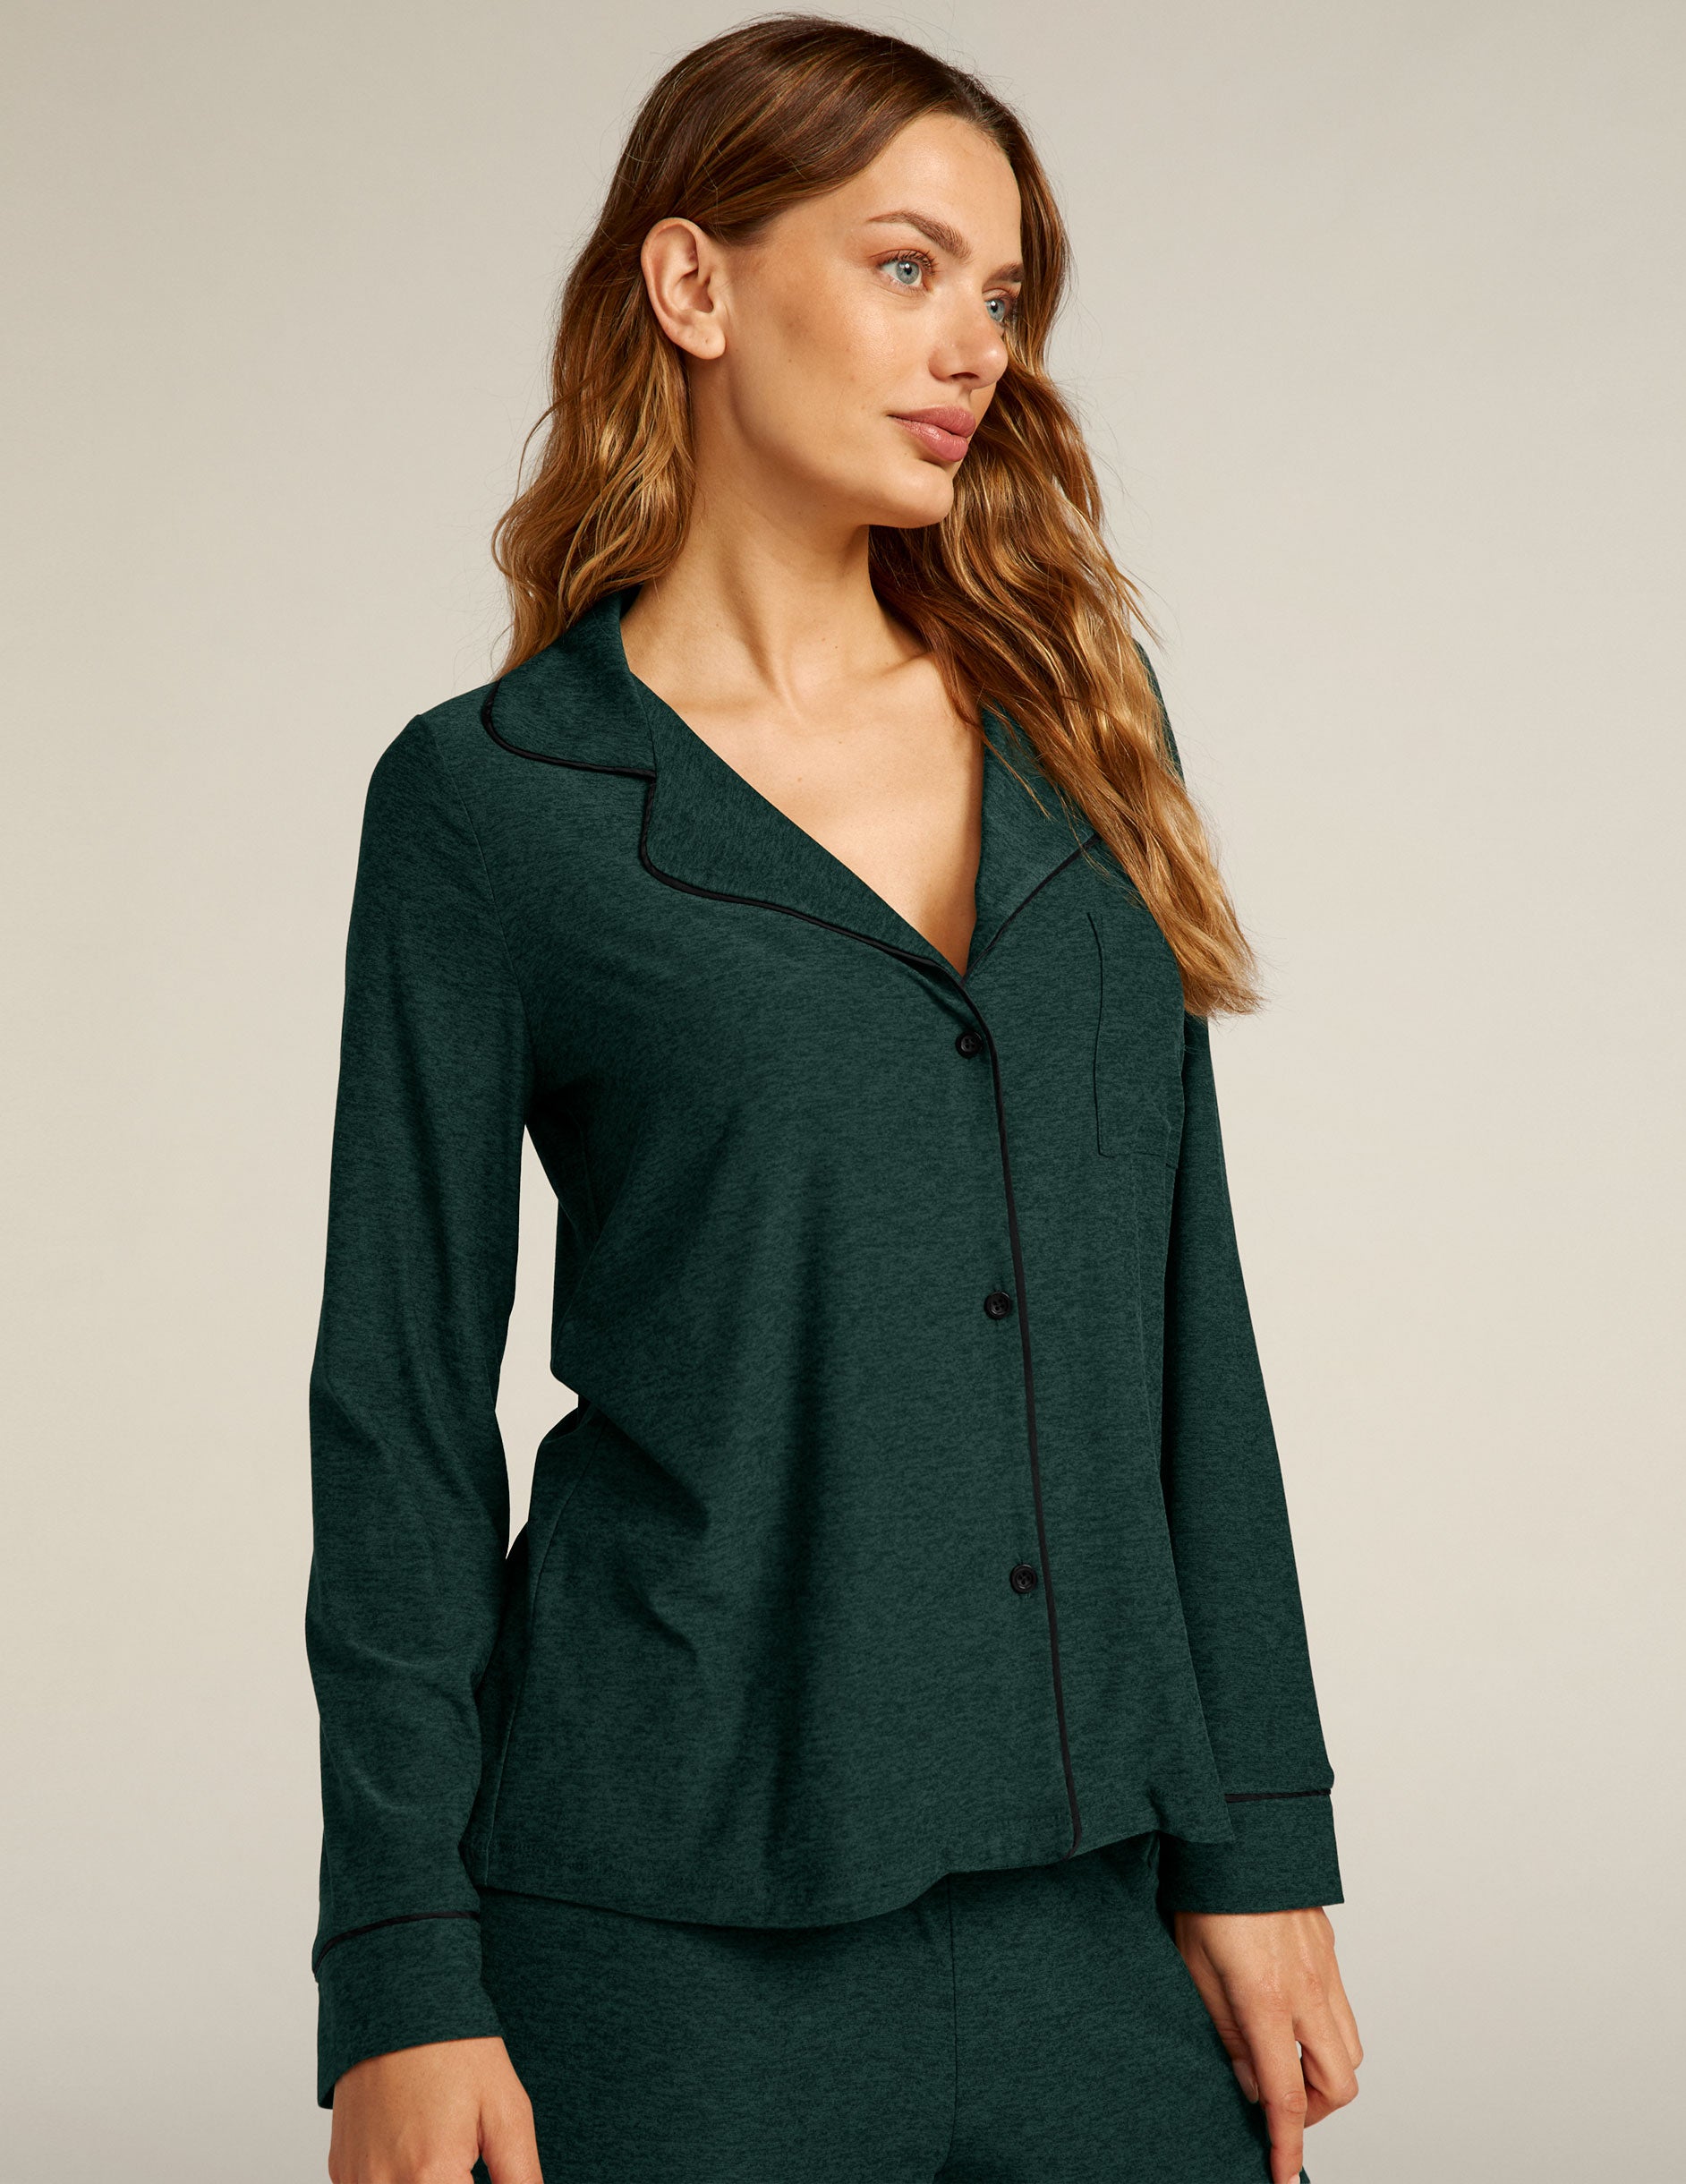 green button up sleep shirt with black piping. 